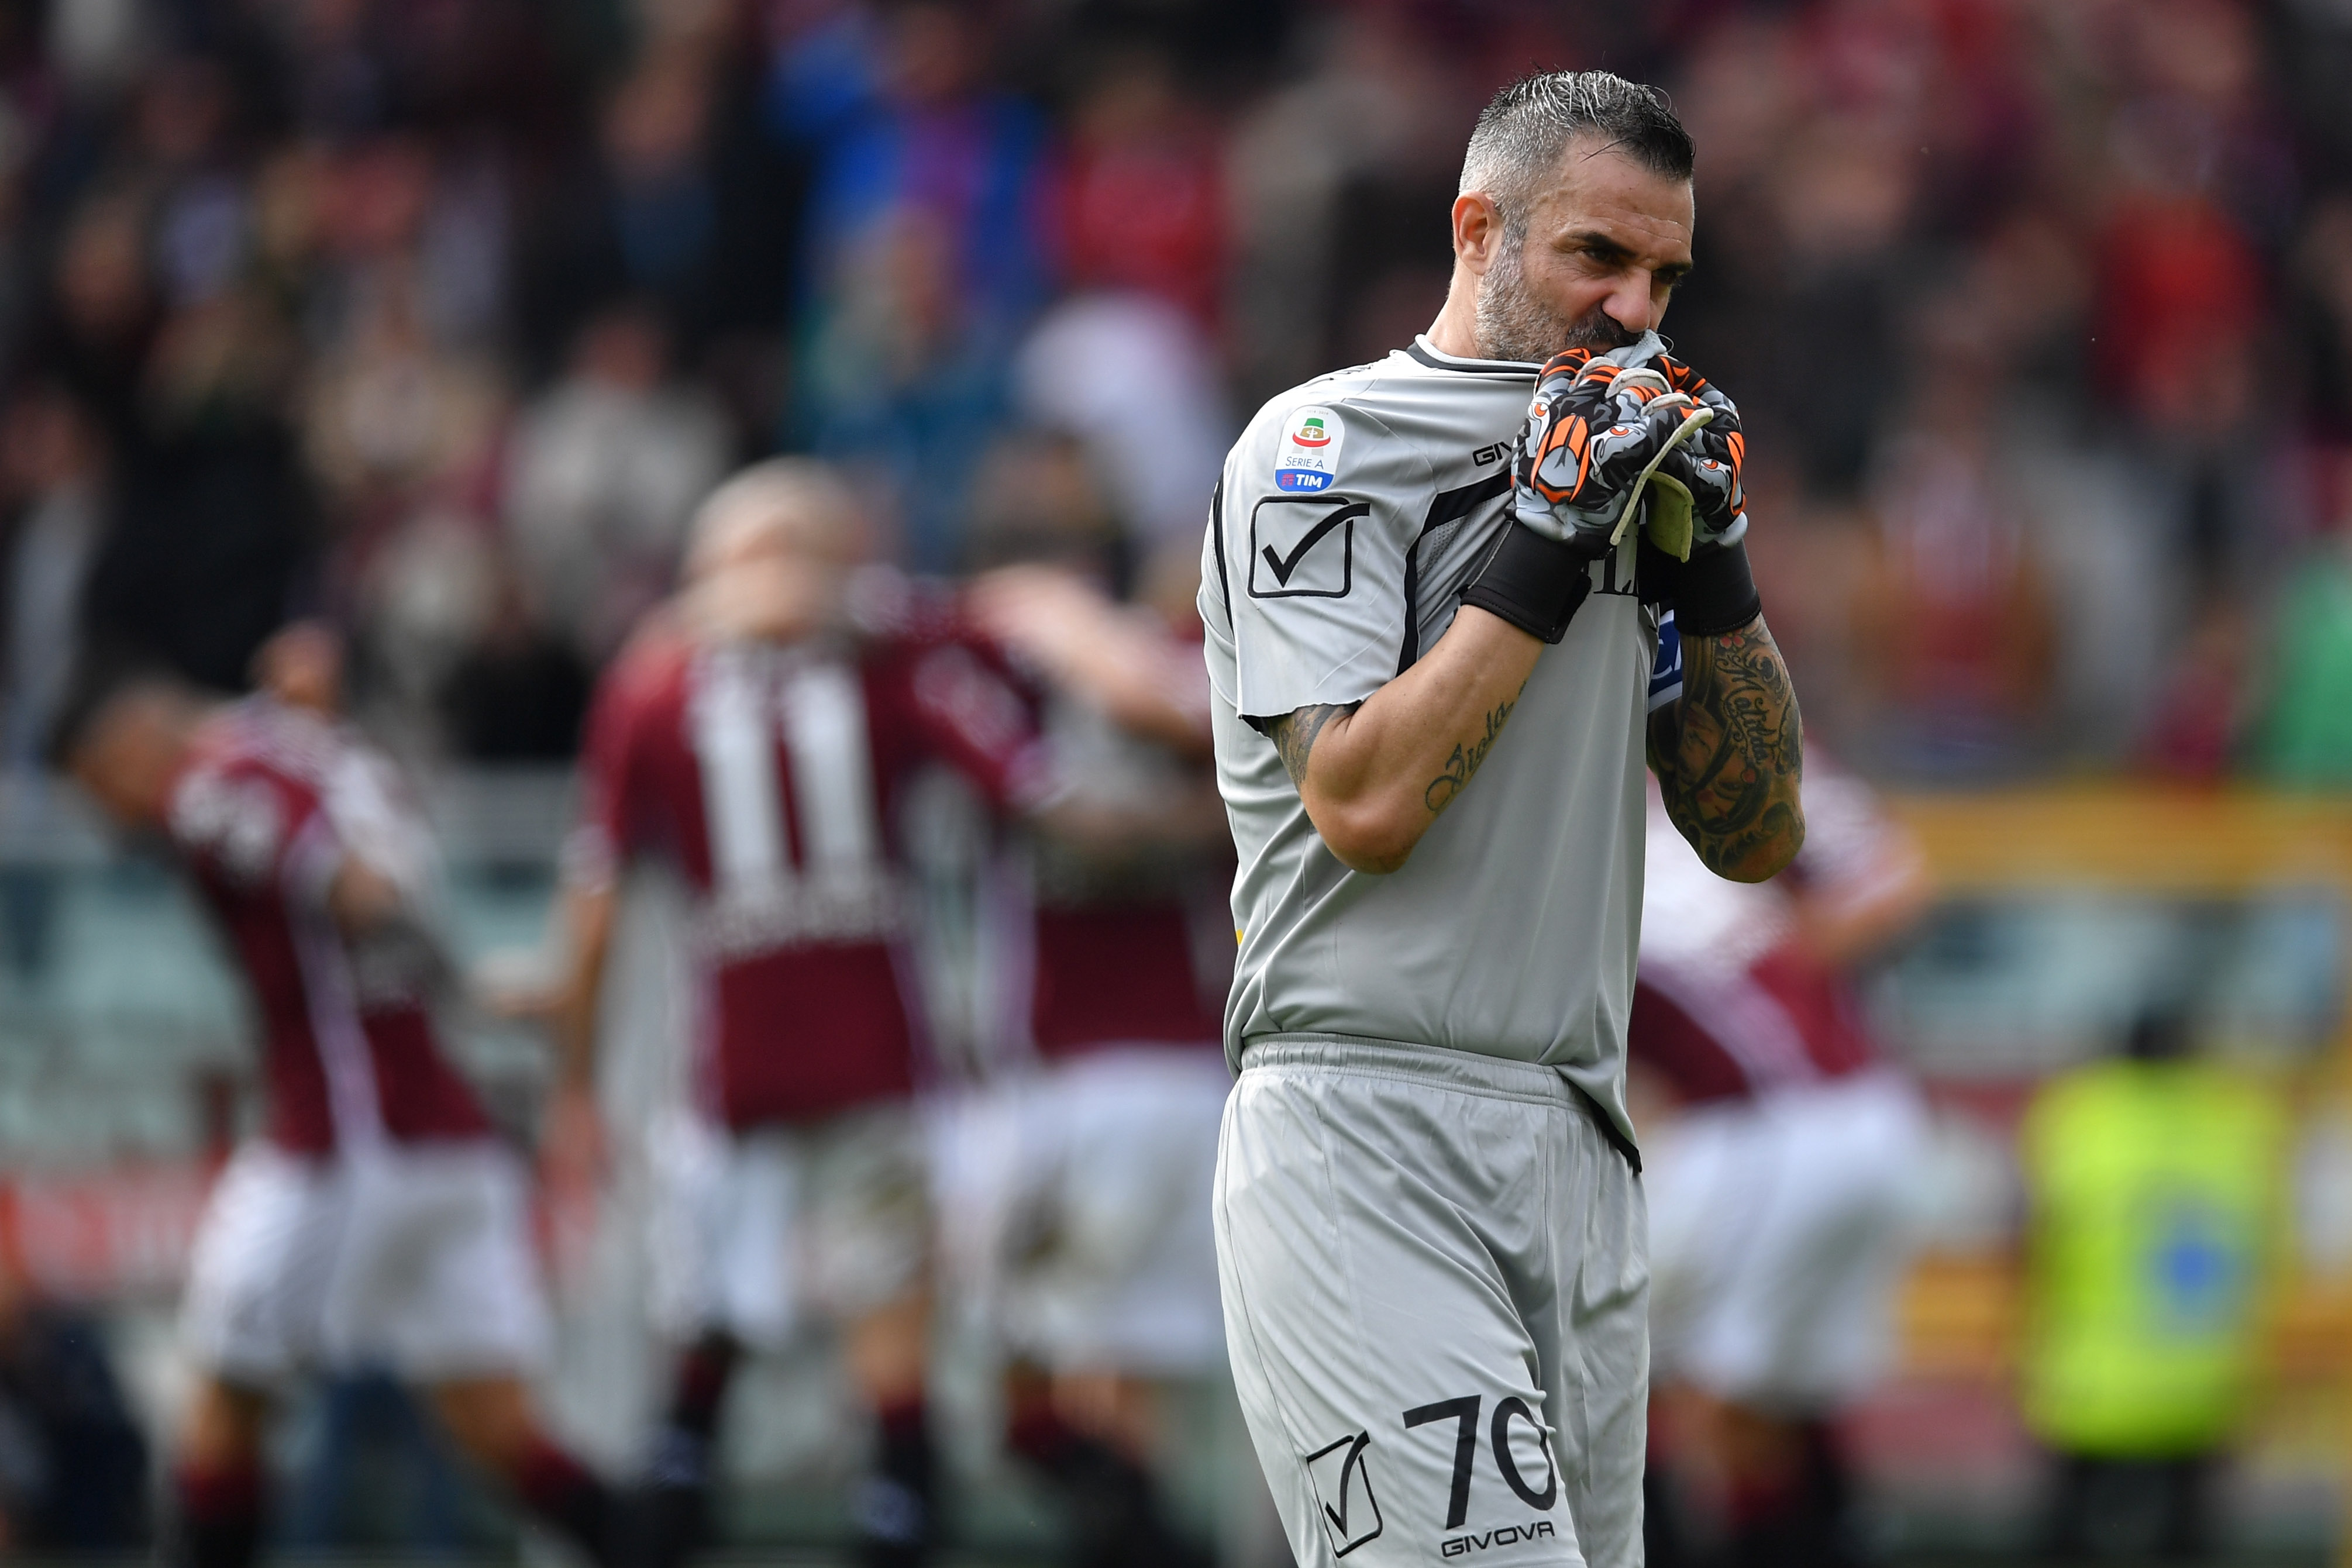 TURIN, ITALY - MARCH 03:  Stefano Sorrentino of Chievo looks dejected during the Serie A match between Torino FC and Chievo at Stadio Olimpico di Torino on March 3, 2019 in Turin, Italy.  (Photo by Valerio Pennicino/Getty Images)